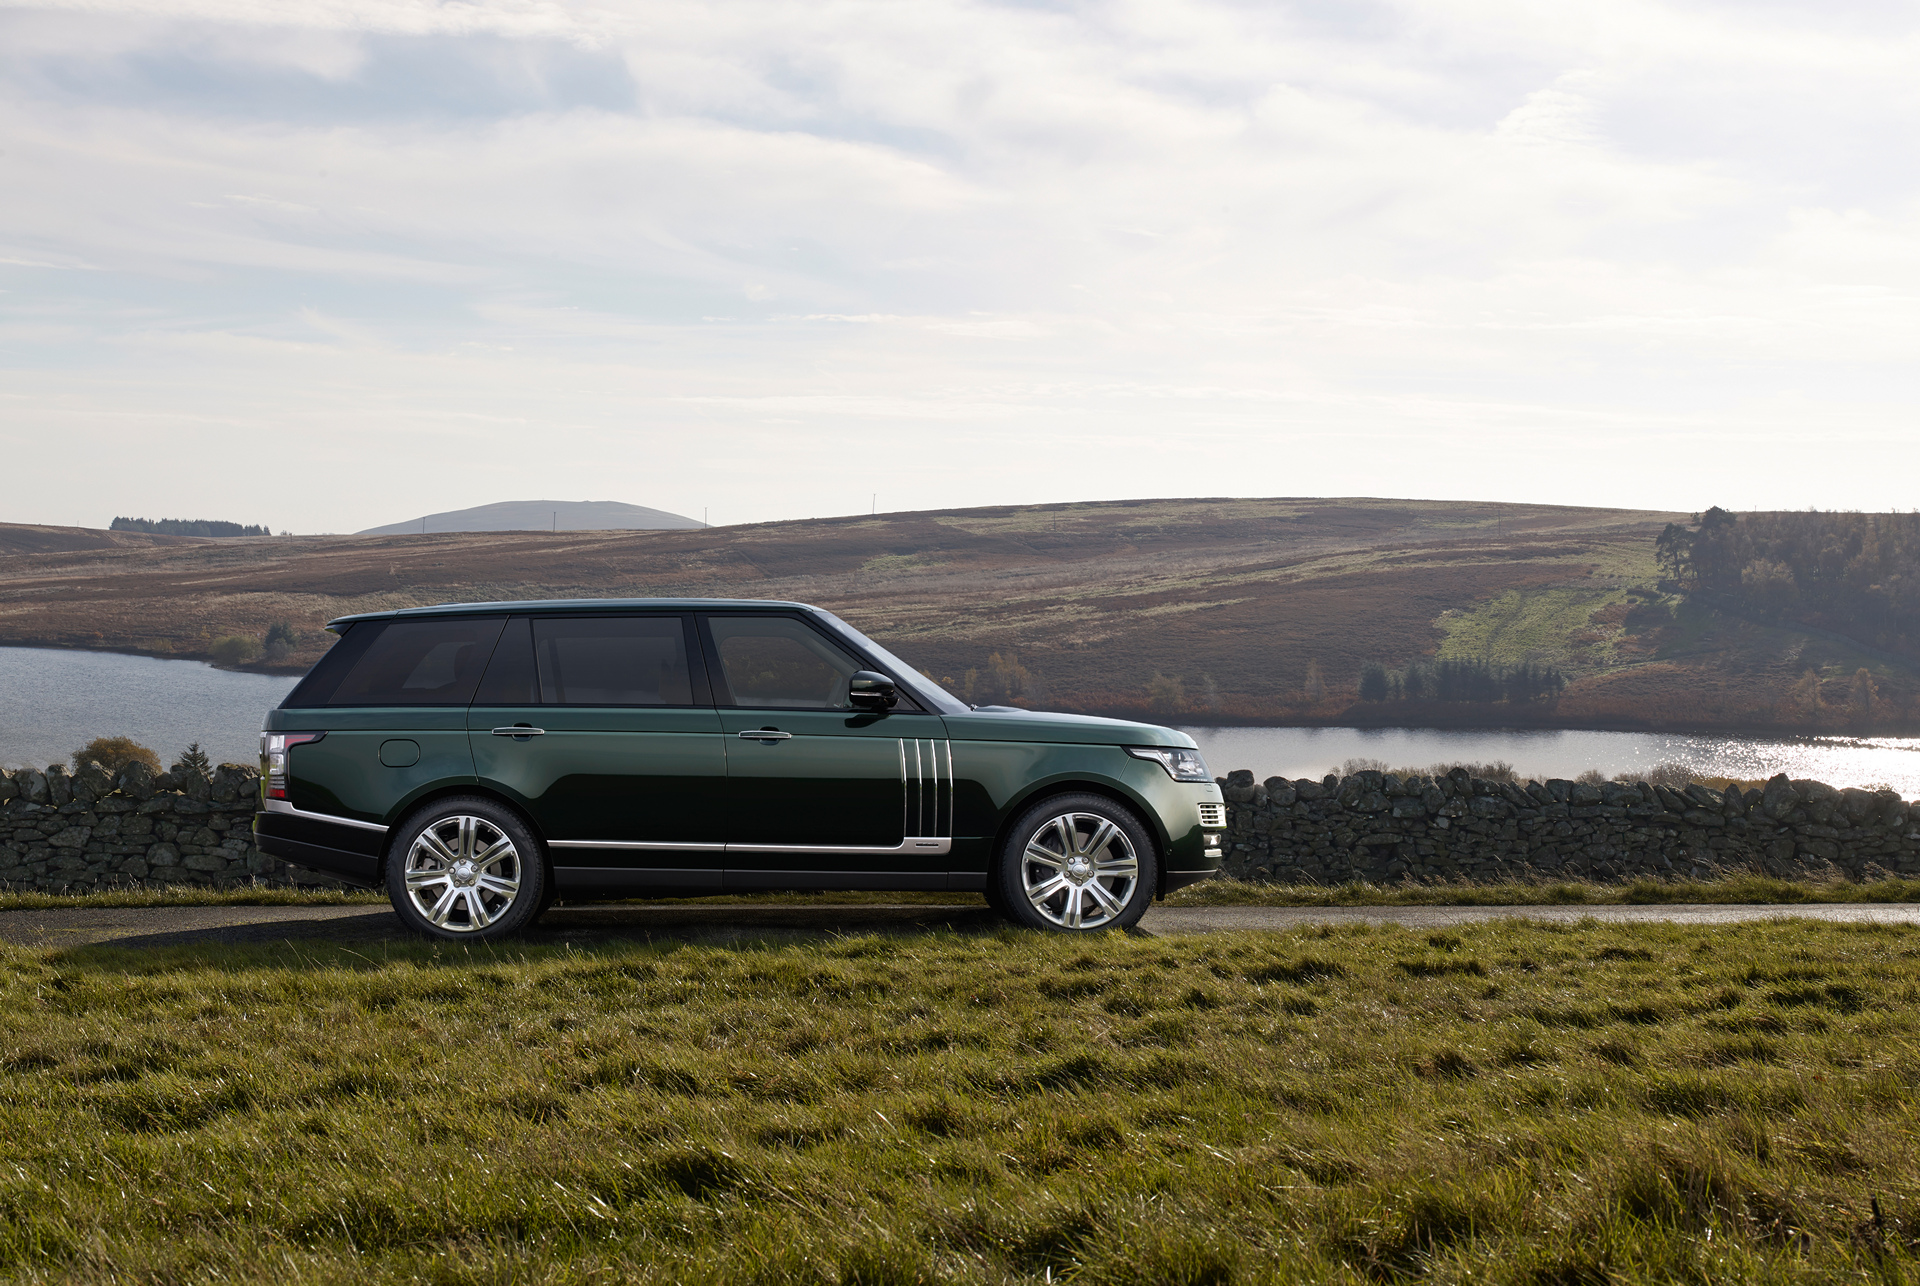 Land Rover Elevates Range Rover Family with Limited Production Holland & Holland Range Rover © Tata Group